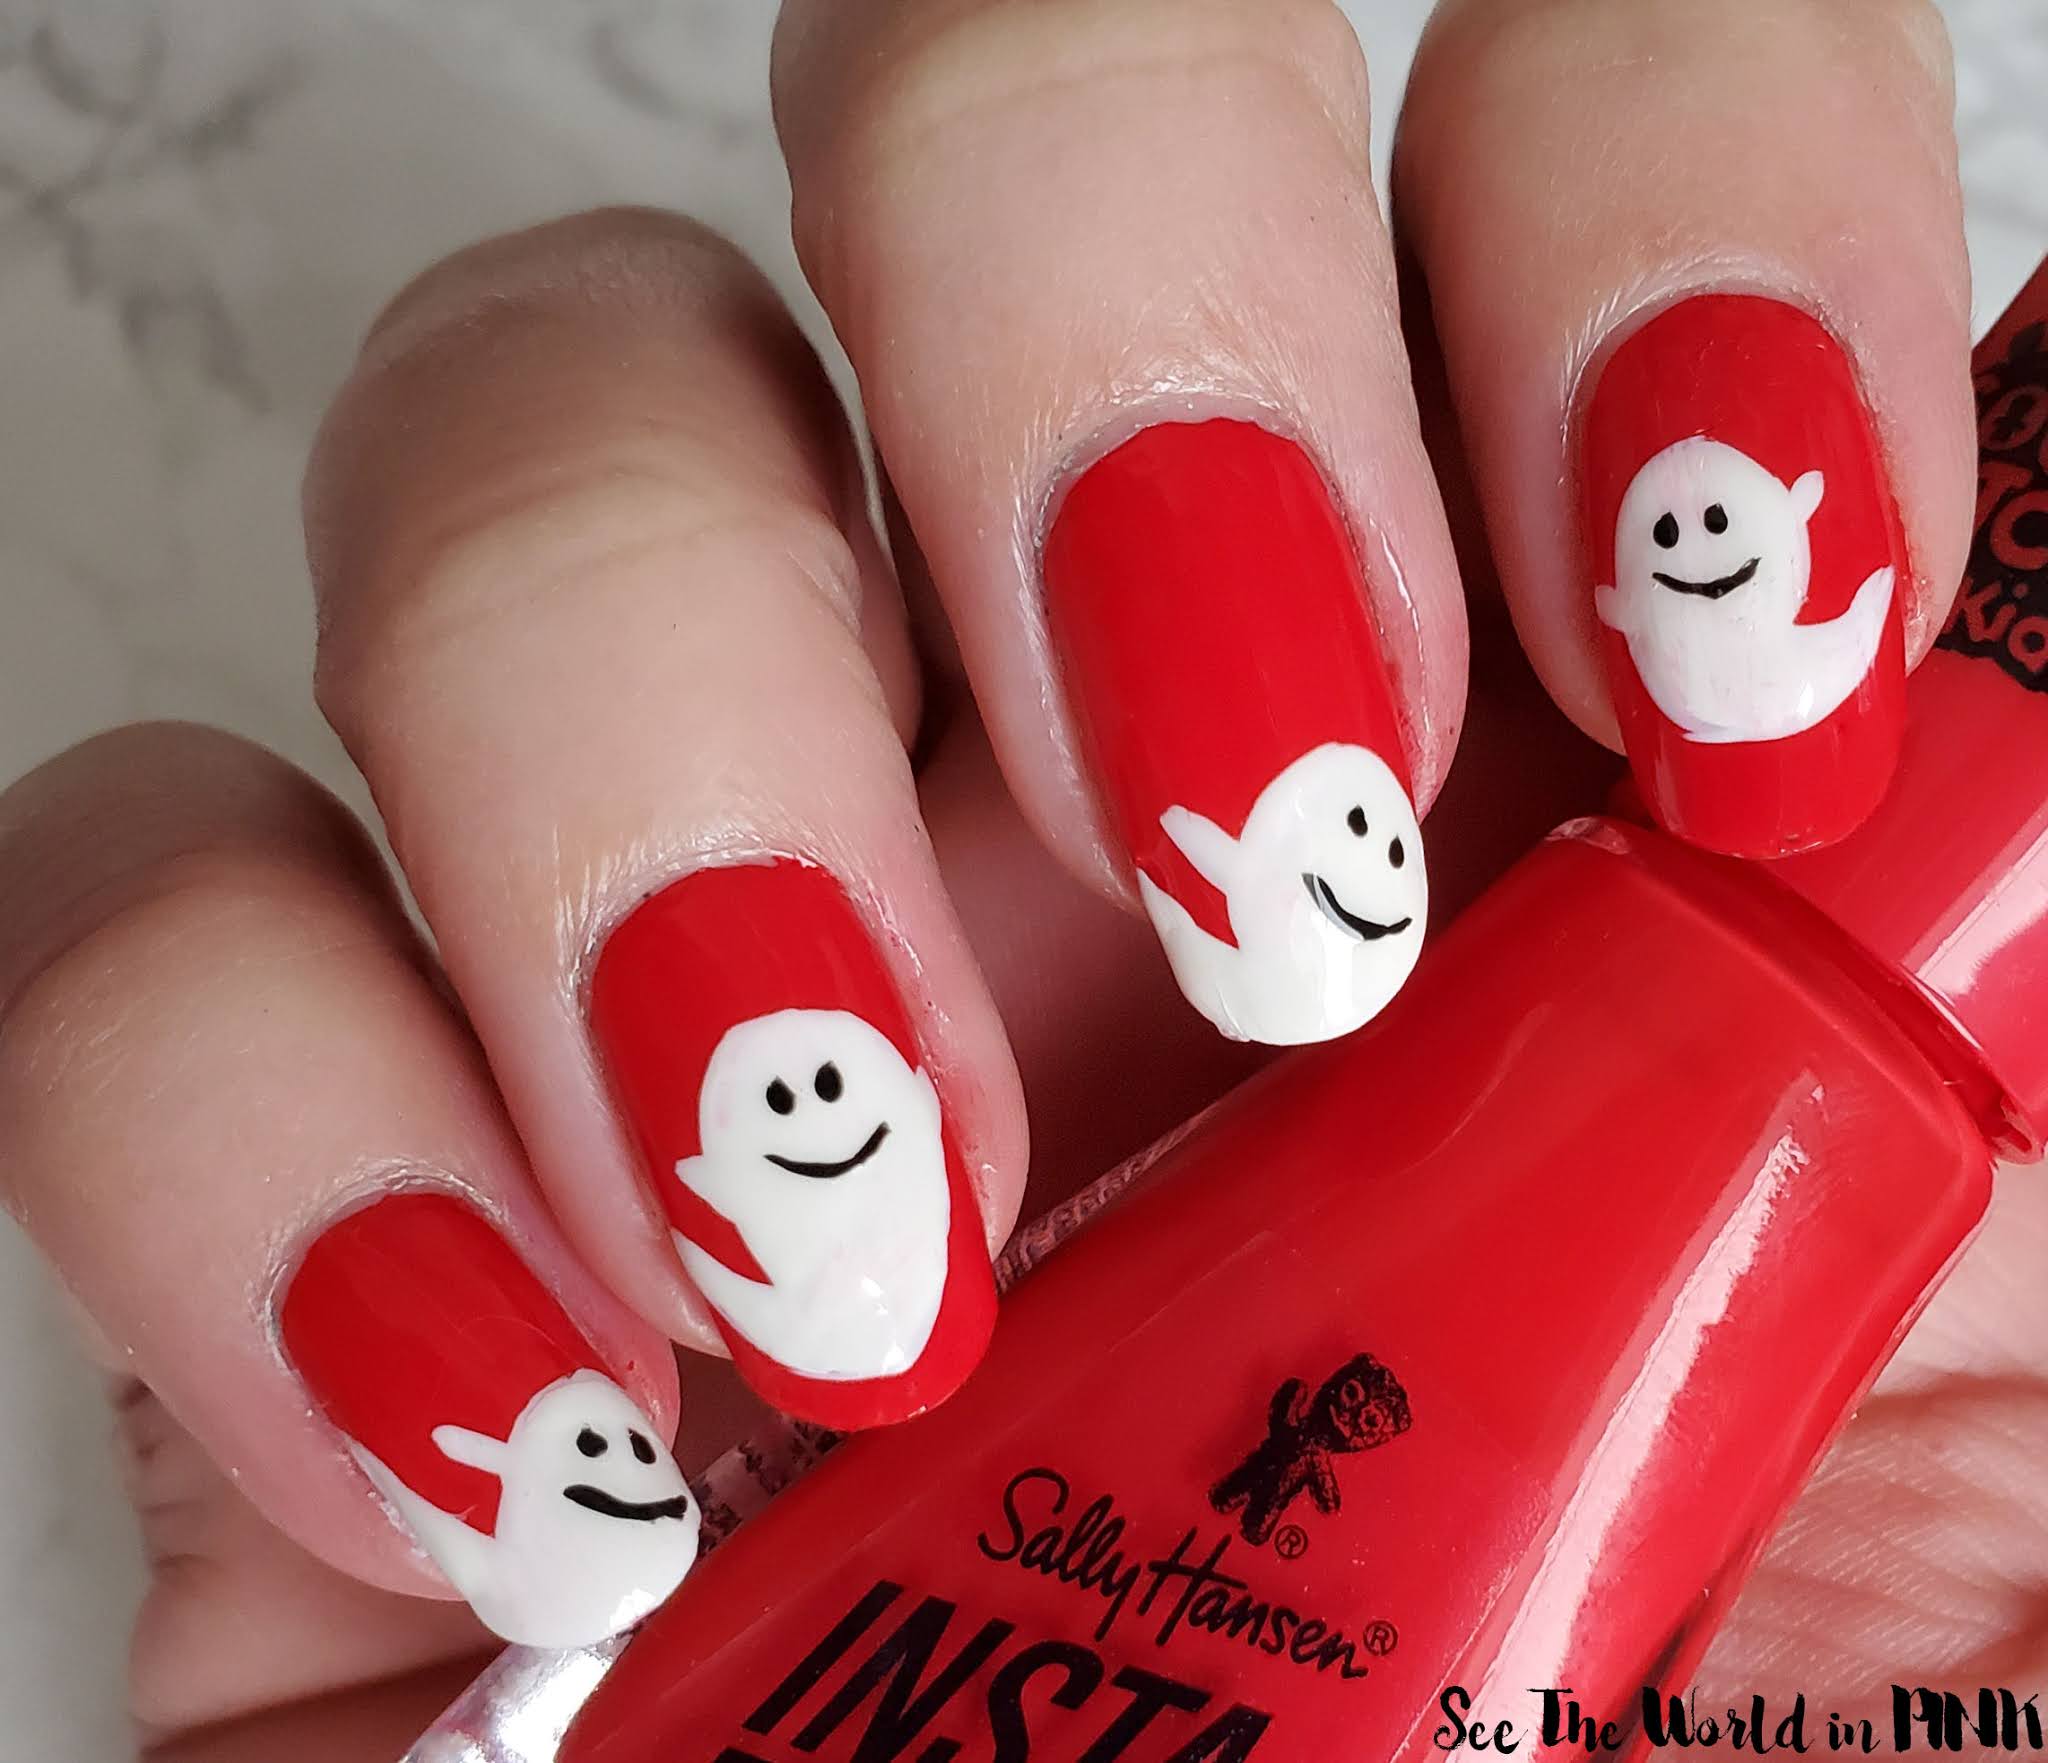 Manicure Monday - Ghost Nails!